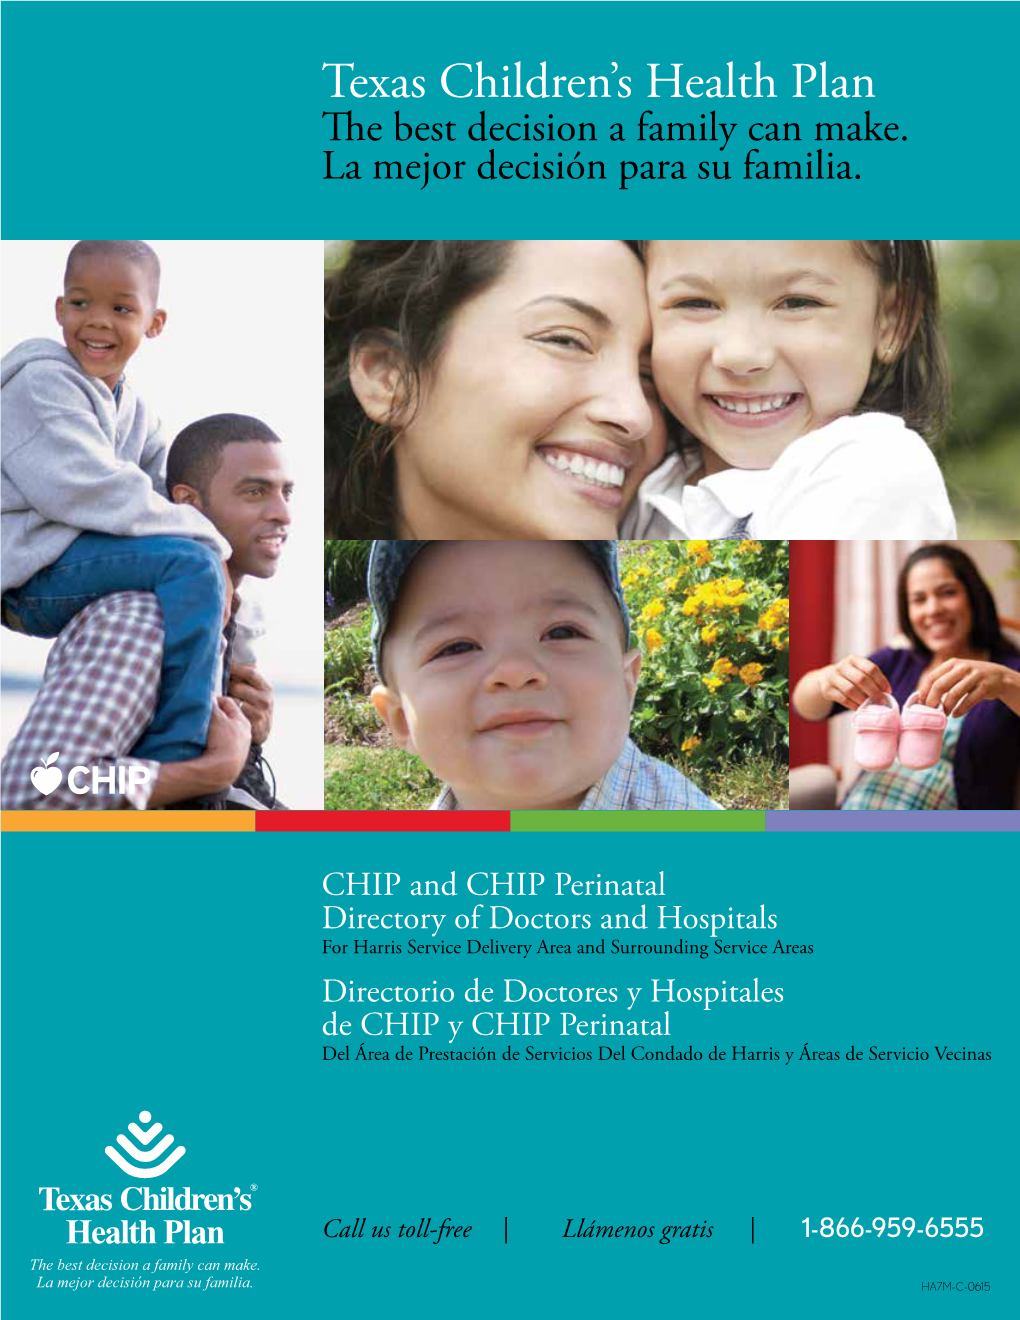 CHIP and CHIP Perinatal Directory of Doctors and Hospitals